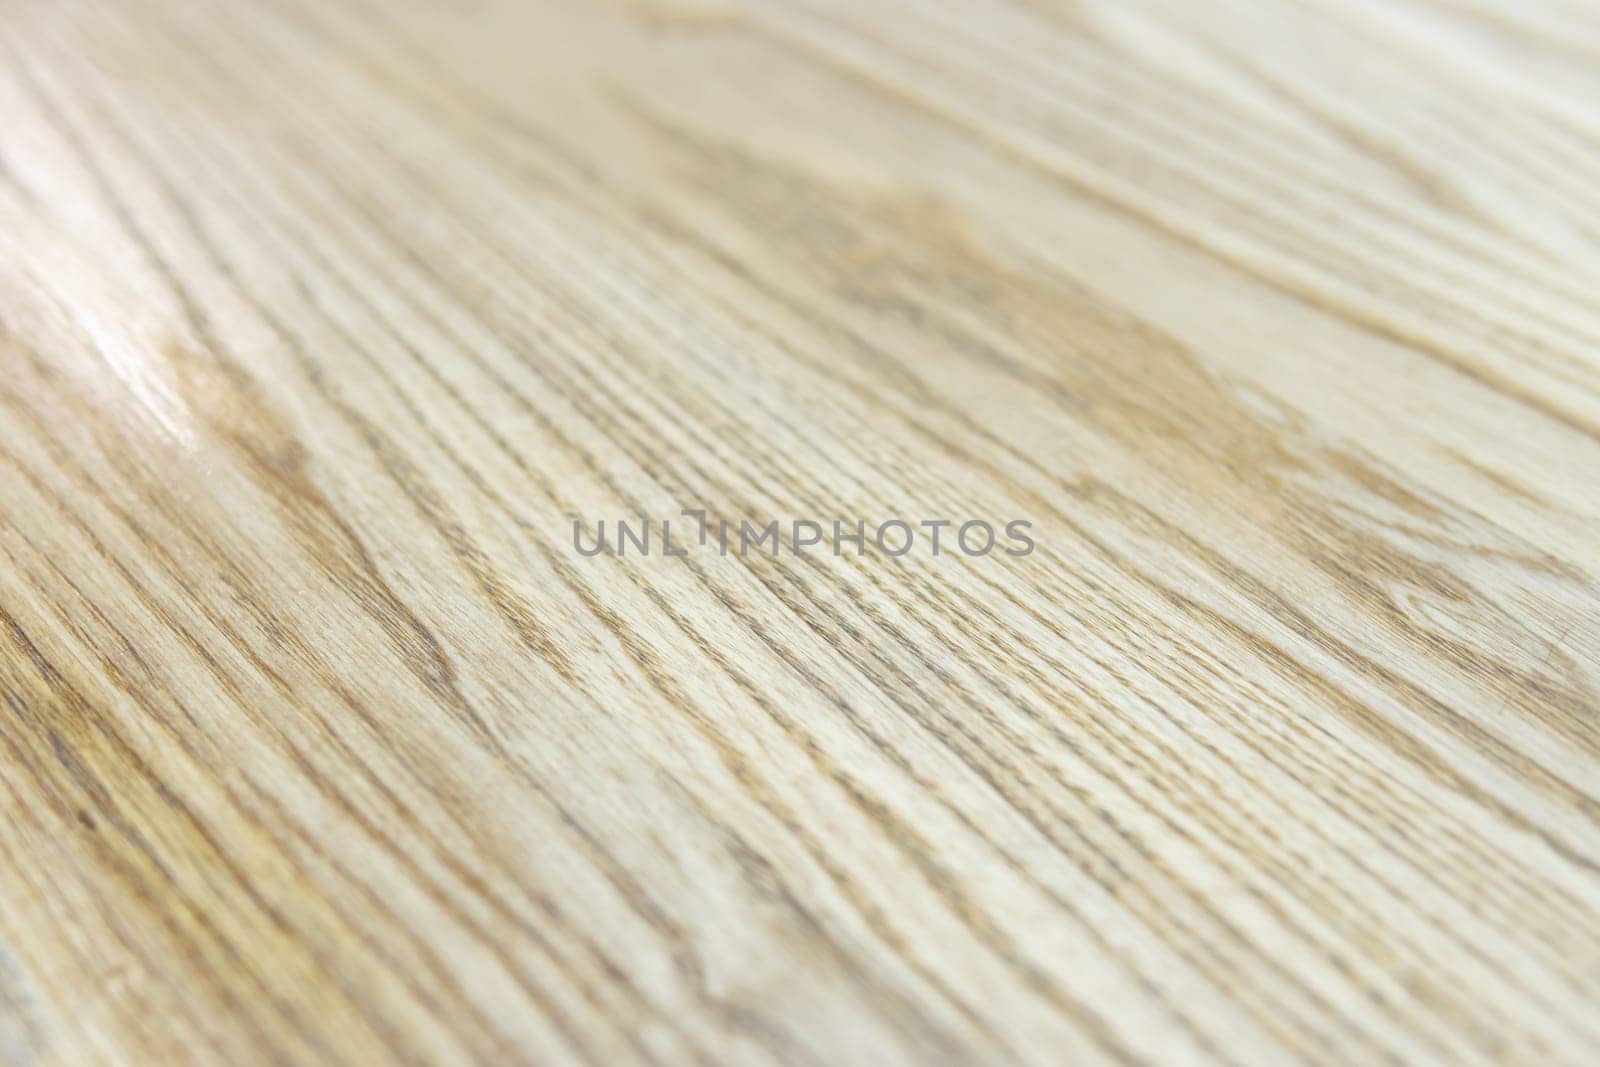 Wood texture background, wooden board in brown color.Grunge wood plank by PopOff